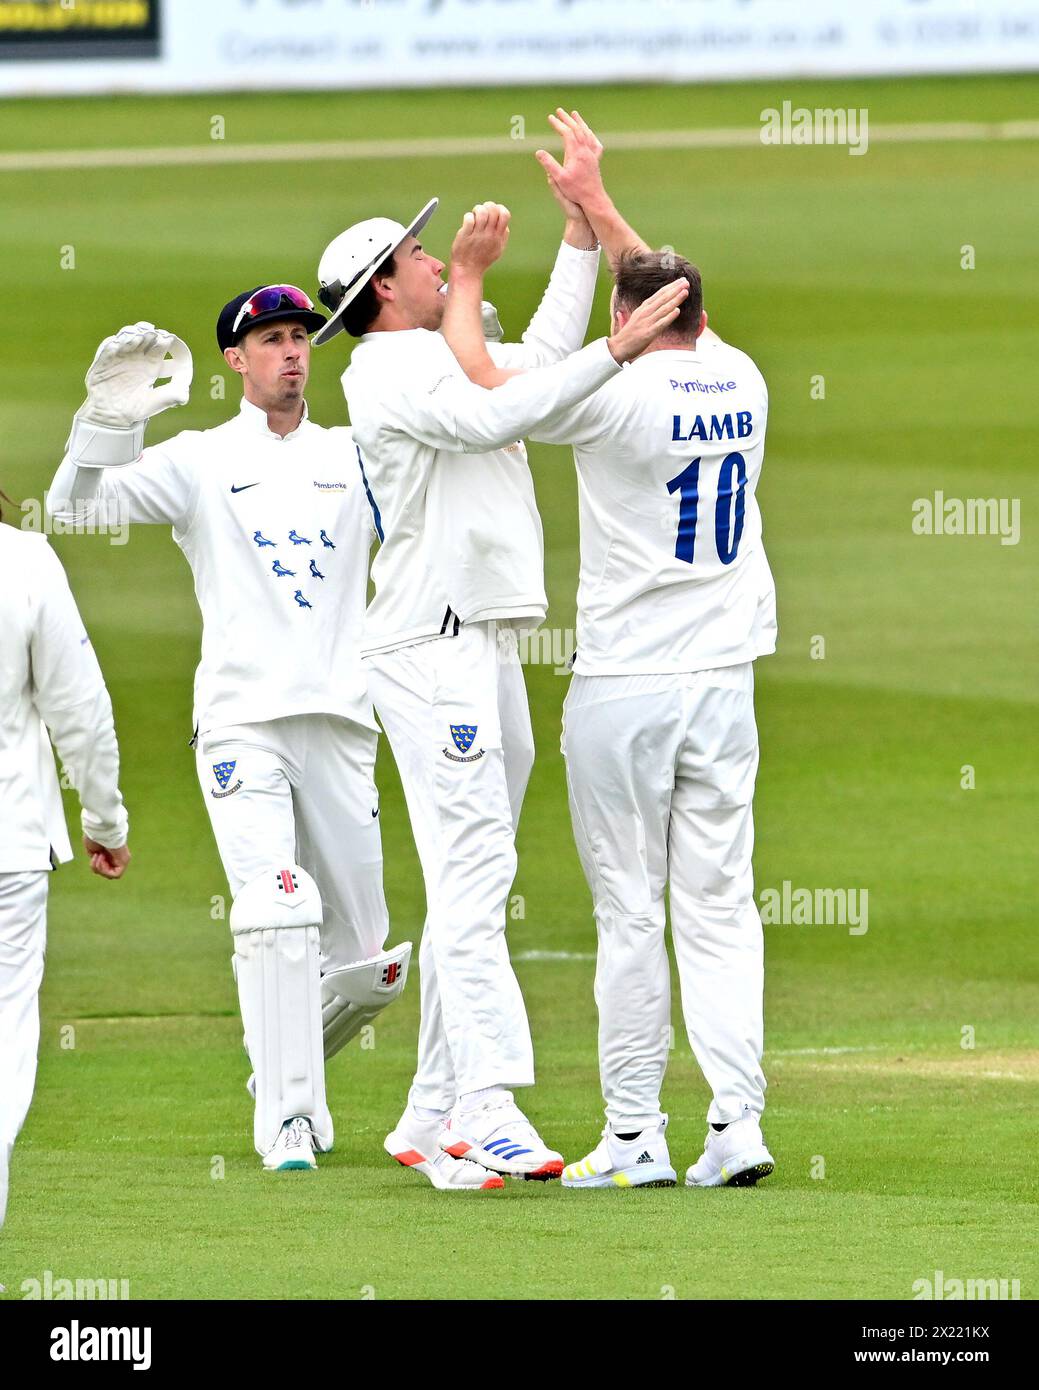 Hove UK 19th April 2024 - Sussex bowler Danny Lamb accidentally slaps fielder James Coles in the face as they celebrate after Lamb had taken the wicket of Gloucestershire's Cameron Bancroft LBW for 27 runs  during the Vitality County Championship League Two cricket match at the 1st Central County Ground in Hove : Credit Simon Dack /TPI/ Alamy Live News Stock Photo